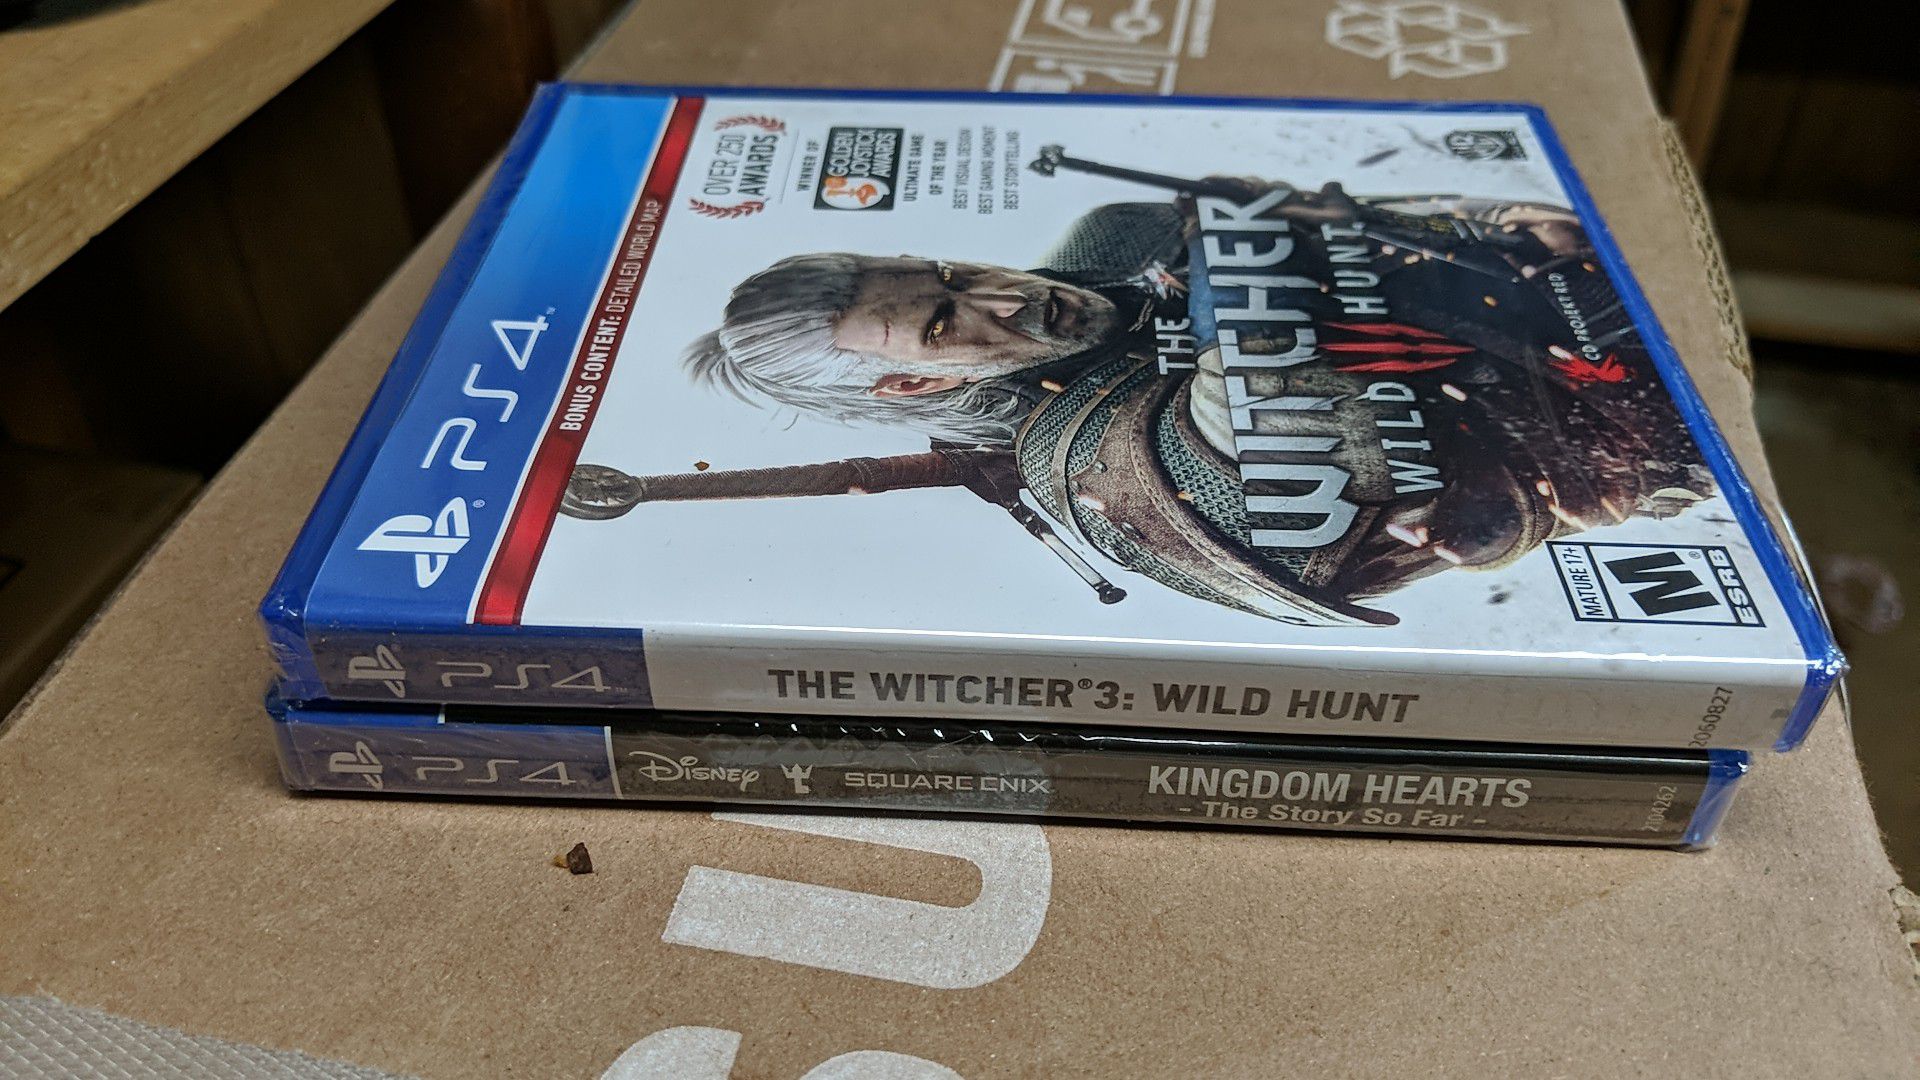 Witcher 3 and kingdom hearts